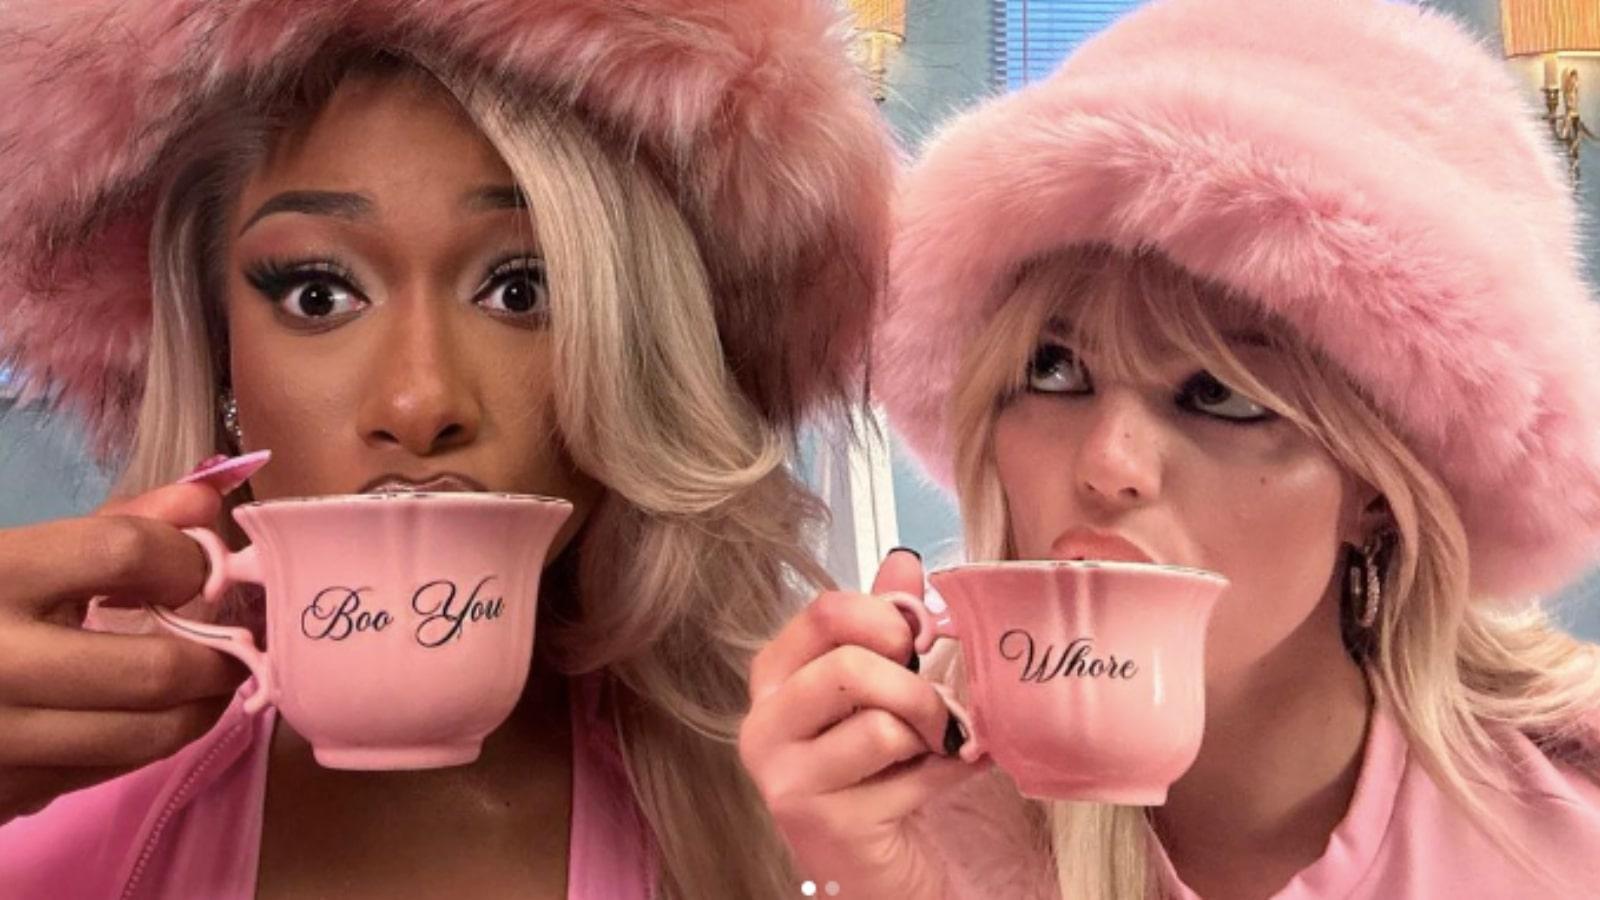 Megan Thee Stallion and Reneé Rapp sipping tea in pink outfits